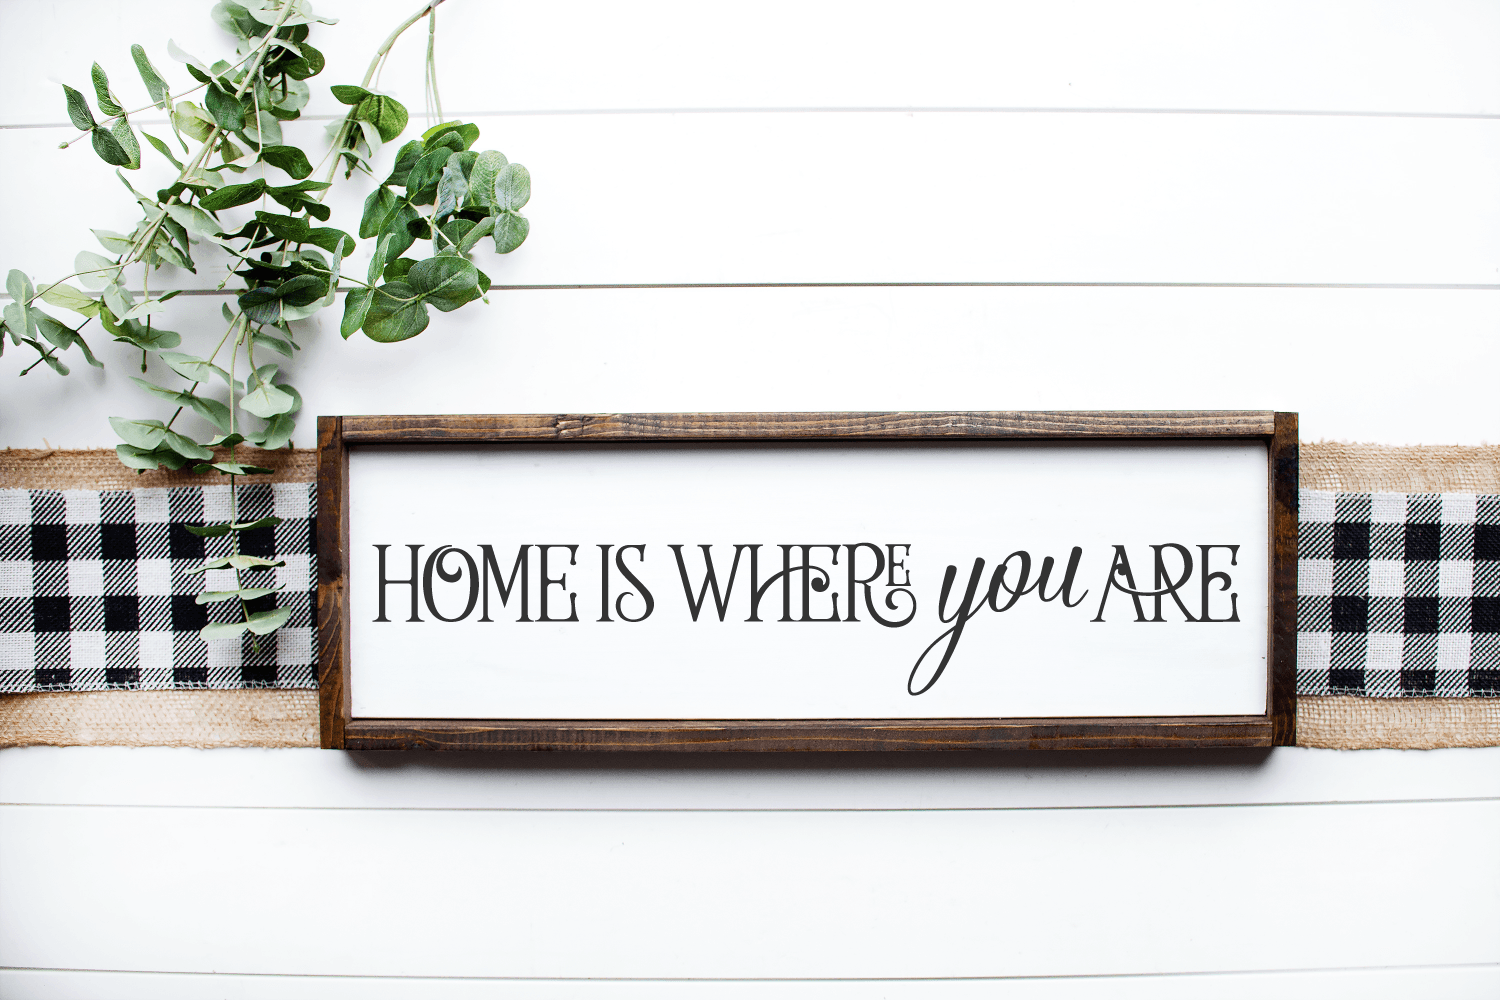 Home Is Where You Are SVG Cut File - Commercial Use SVG Files for Cricut & Silhouette